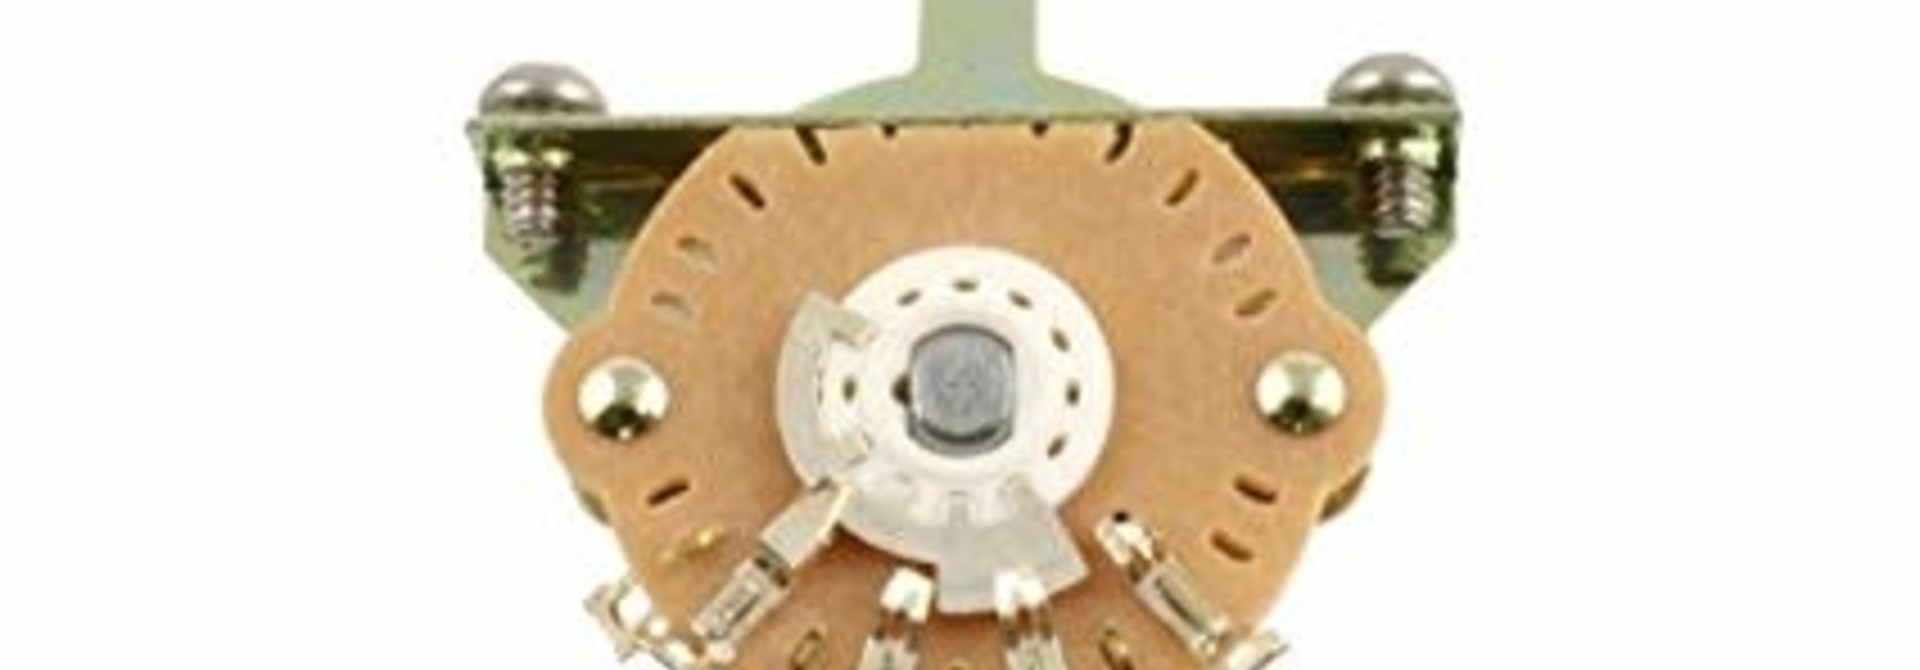 AllParts EP-0478 5-Way Oak Grigsby Blade Switch